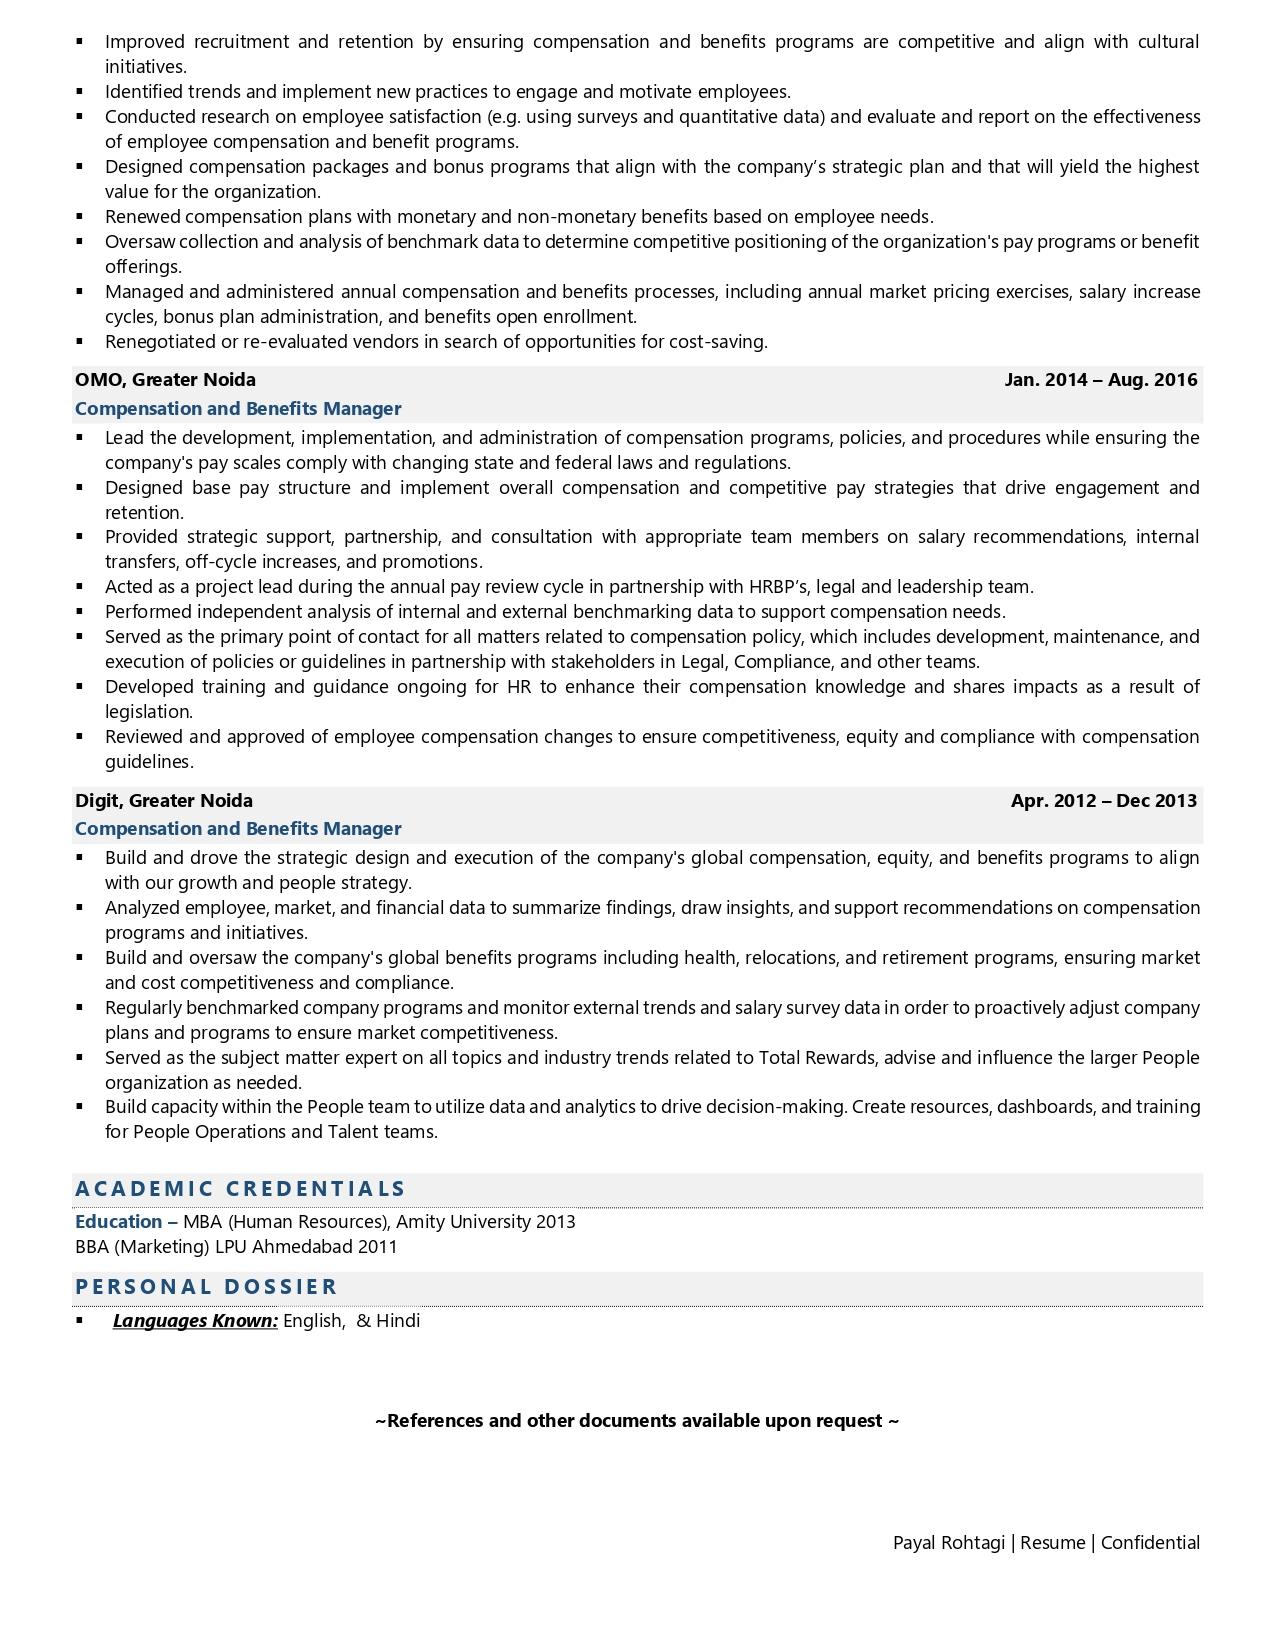 Compensation & Benefits Manager - Resume Example & Template